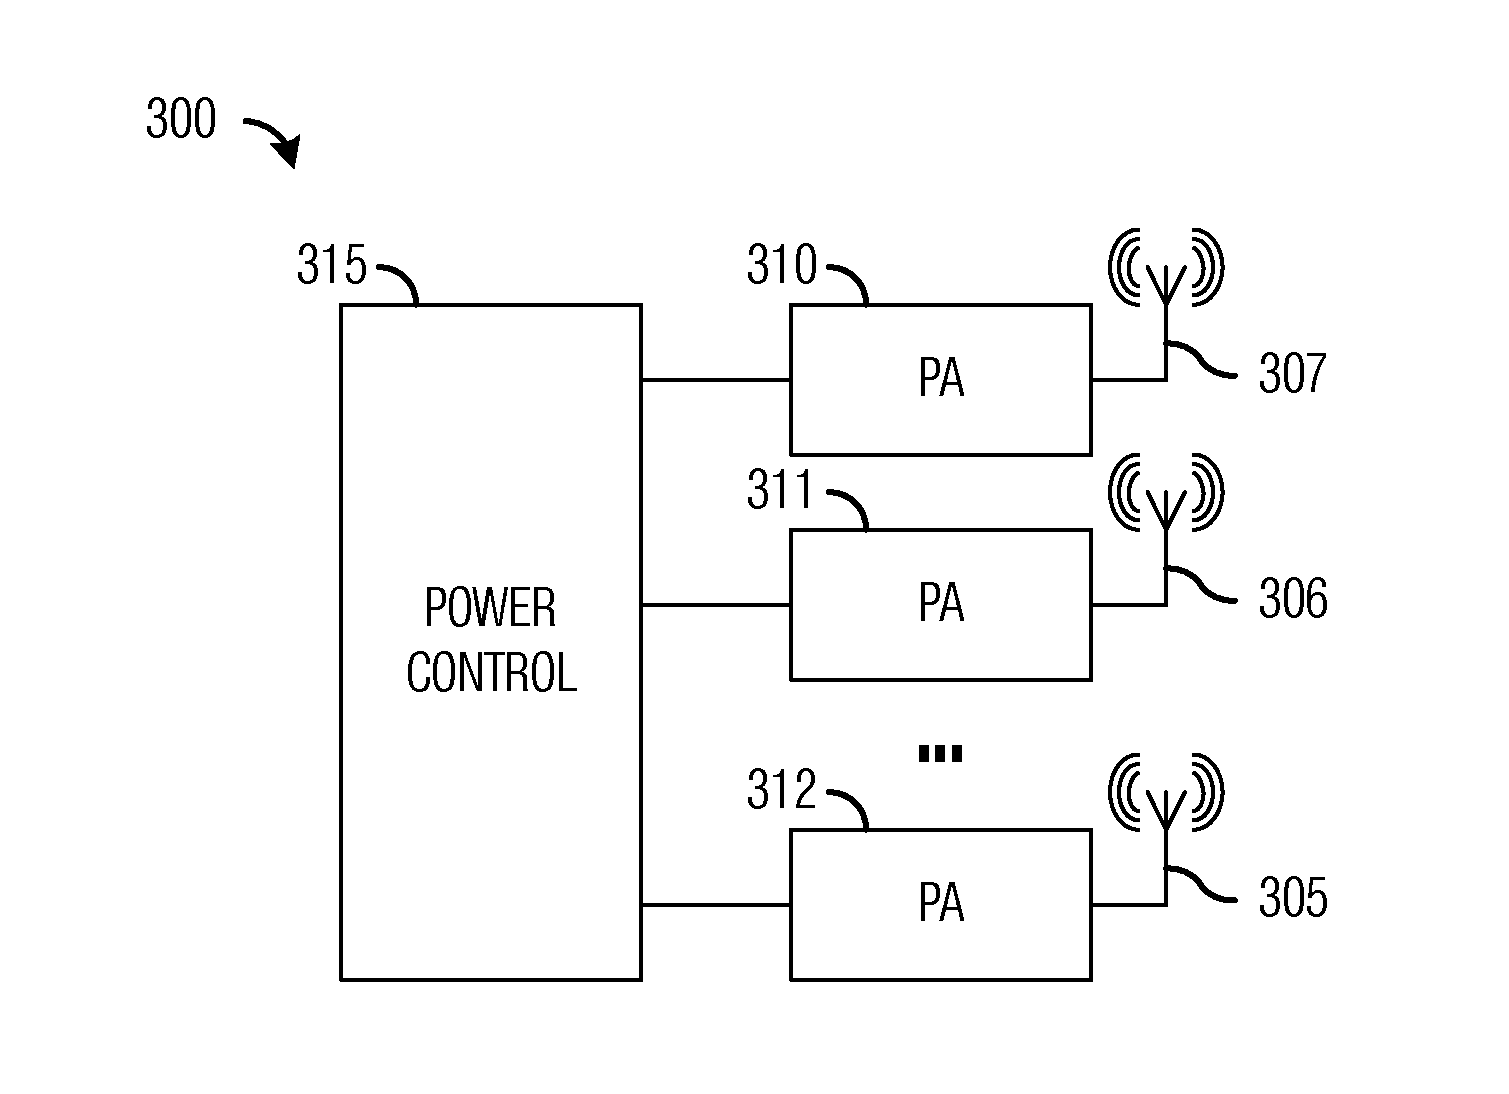 System and Method for Uplink Multi-Antenna Power Control in a Communications System